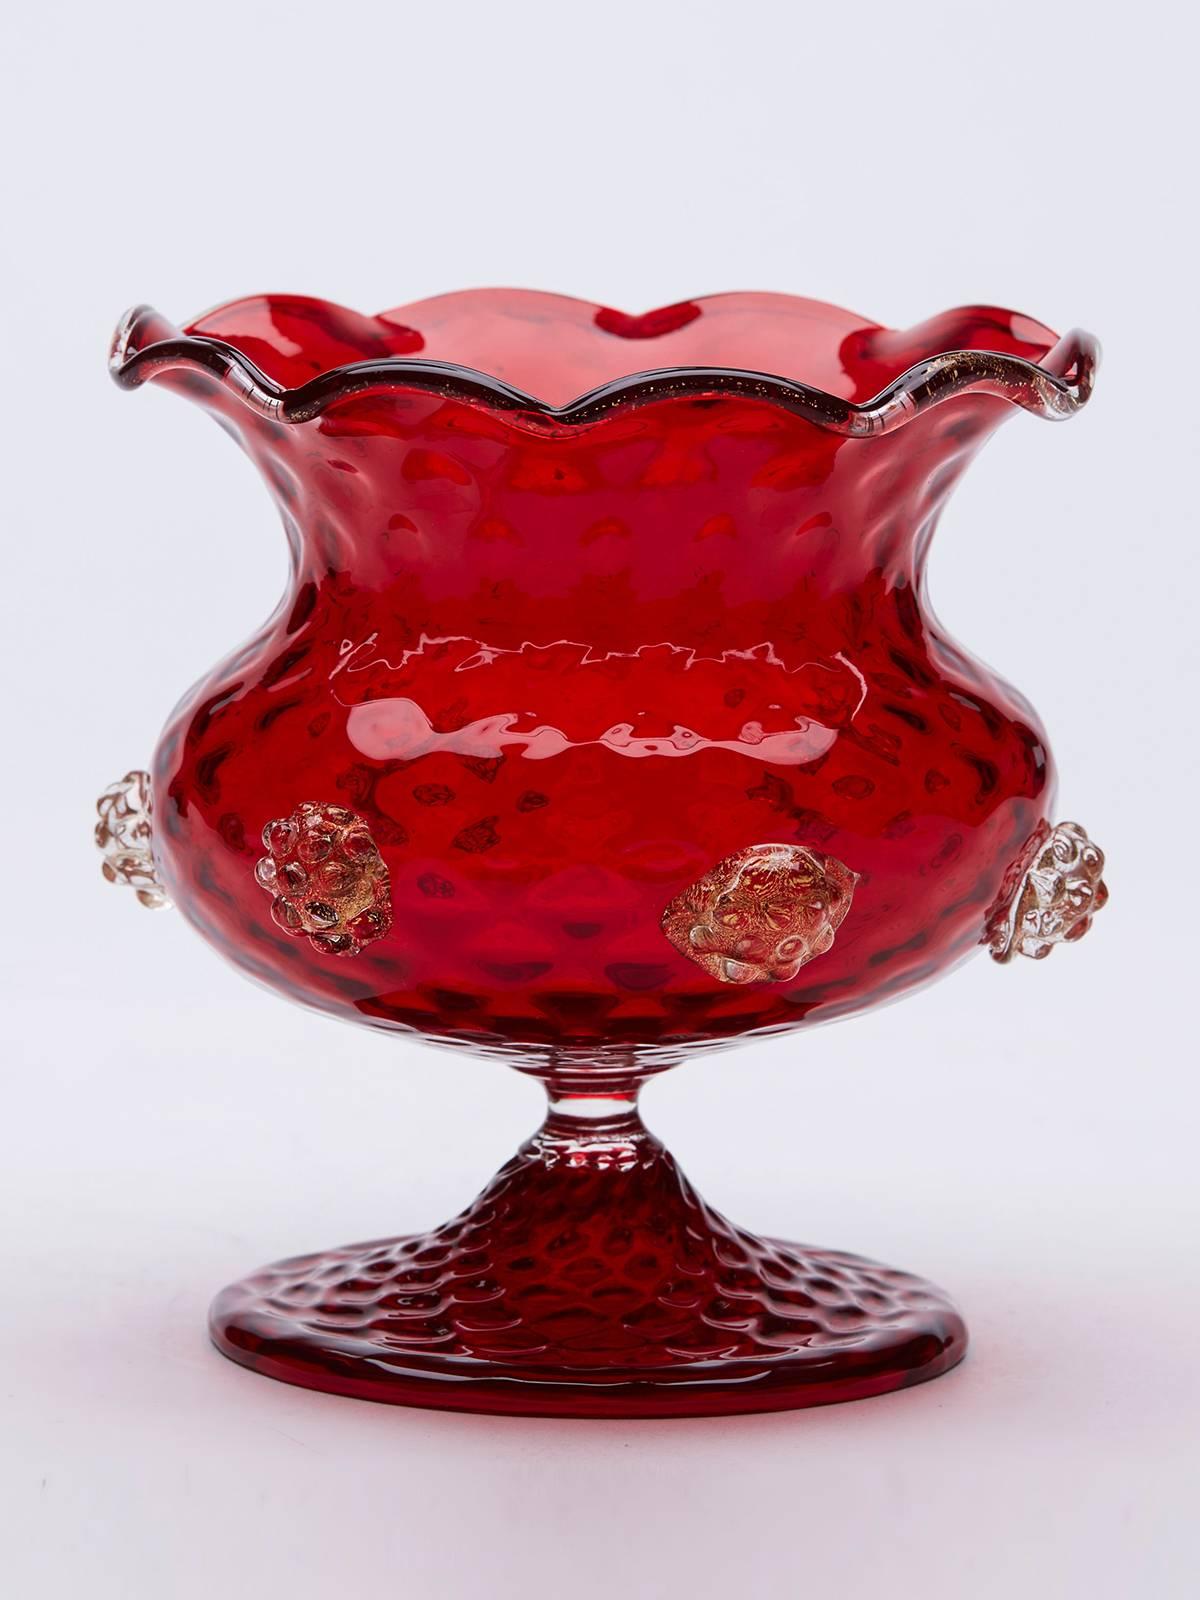 A stunning Italian Mid-Century Murano red art glass pedestal bowl with clear glass and aventrine berry applications and with a piped clear glass and aventrine rim. The domed foot has a moulded textured finish with a similar pattern to the body of